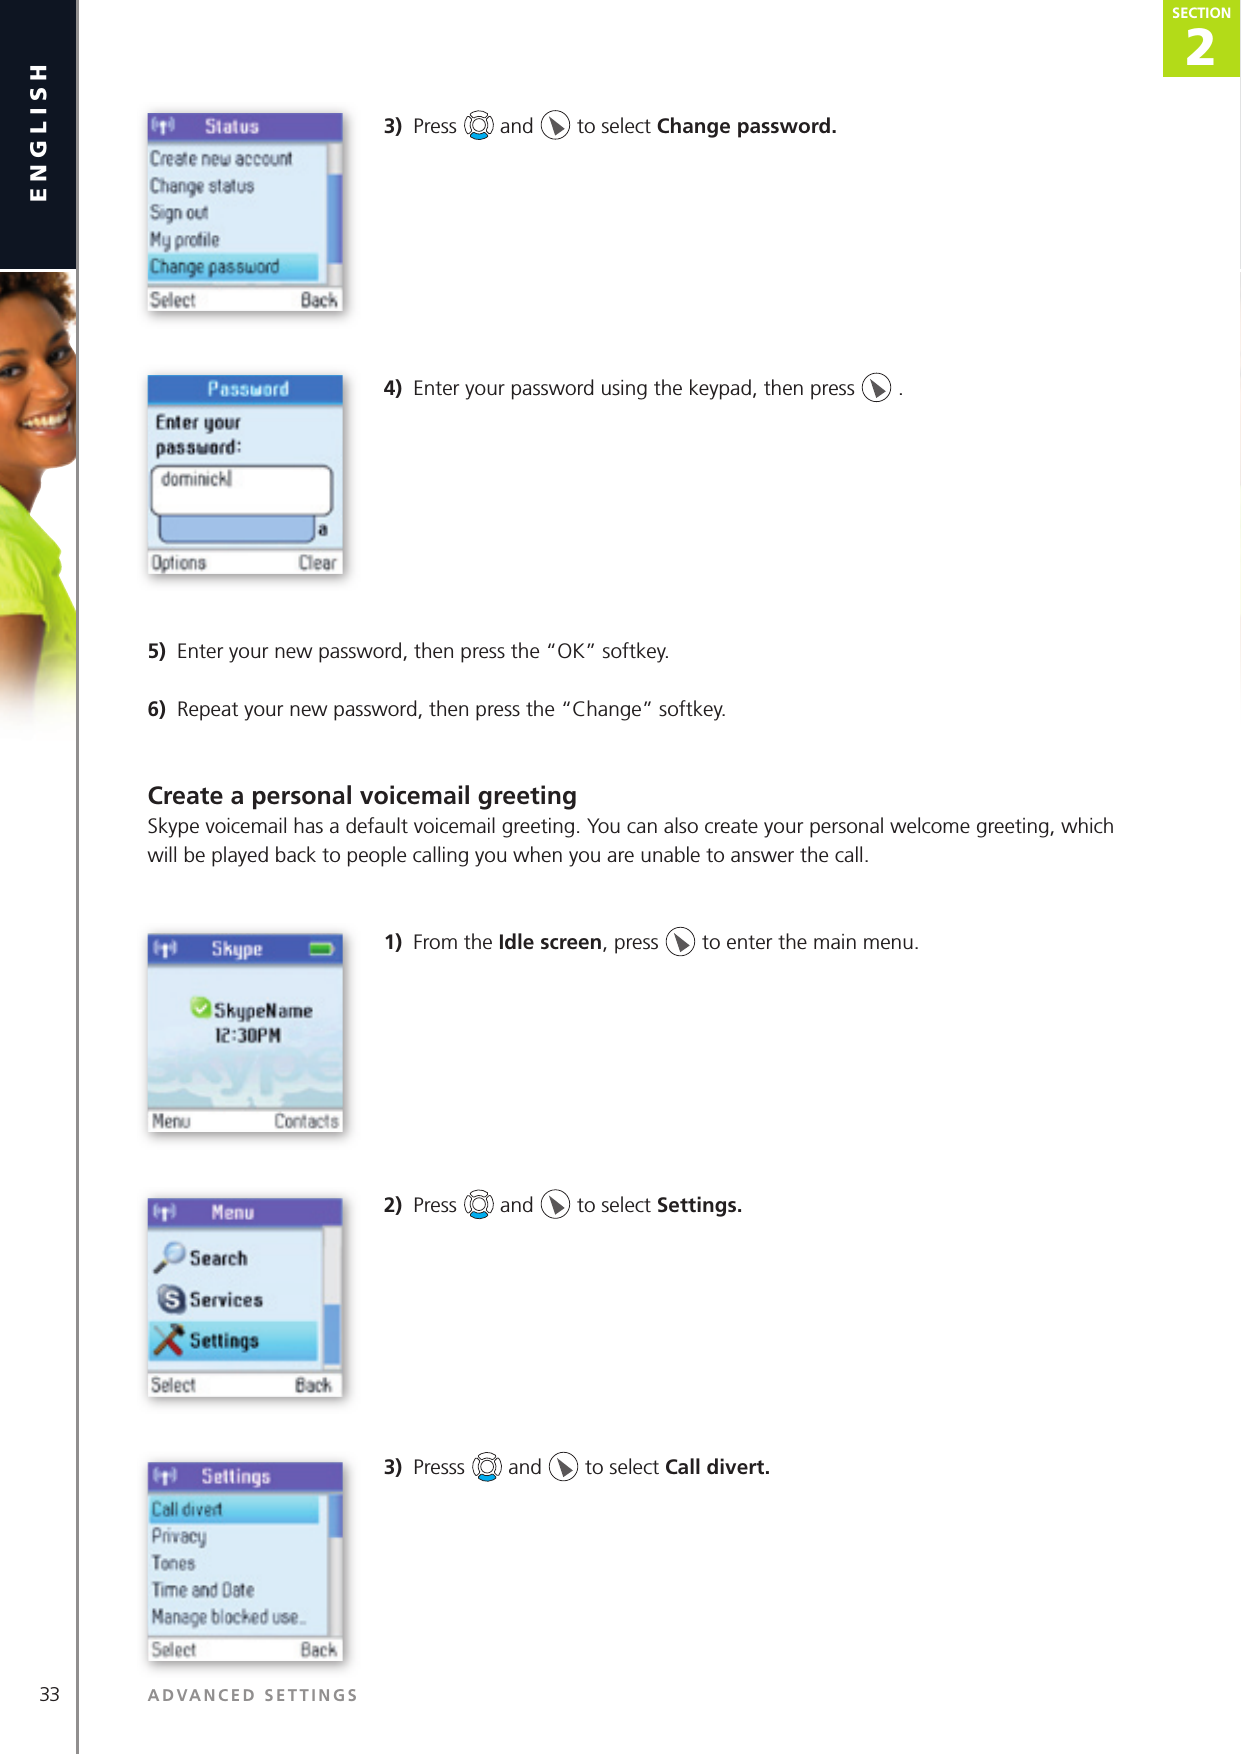 33 ADVANCED SETTINGSenglish2SECTIONSECTION3)  Press   and   to select Change password. 4)  Enter your password using the keypad, then press   .5)  Enter your new password, then press the “OK” softkey.6)  Repeat your new password, then press the “Change” softkey.Create a personal voicemail greetingSkype voicemail has a default voicemail greeting. You can also create your personal welcome greeting, which will be played back to people calling you when you are unable to answer the call.1)  From the Idle screen, press   to enter the main menu. 2)  Press   and   to select Settings. 3)  Presss   and   to select Call divert.